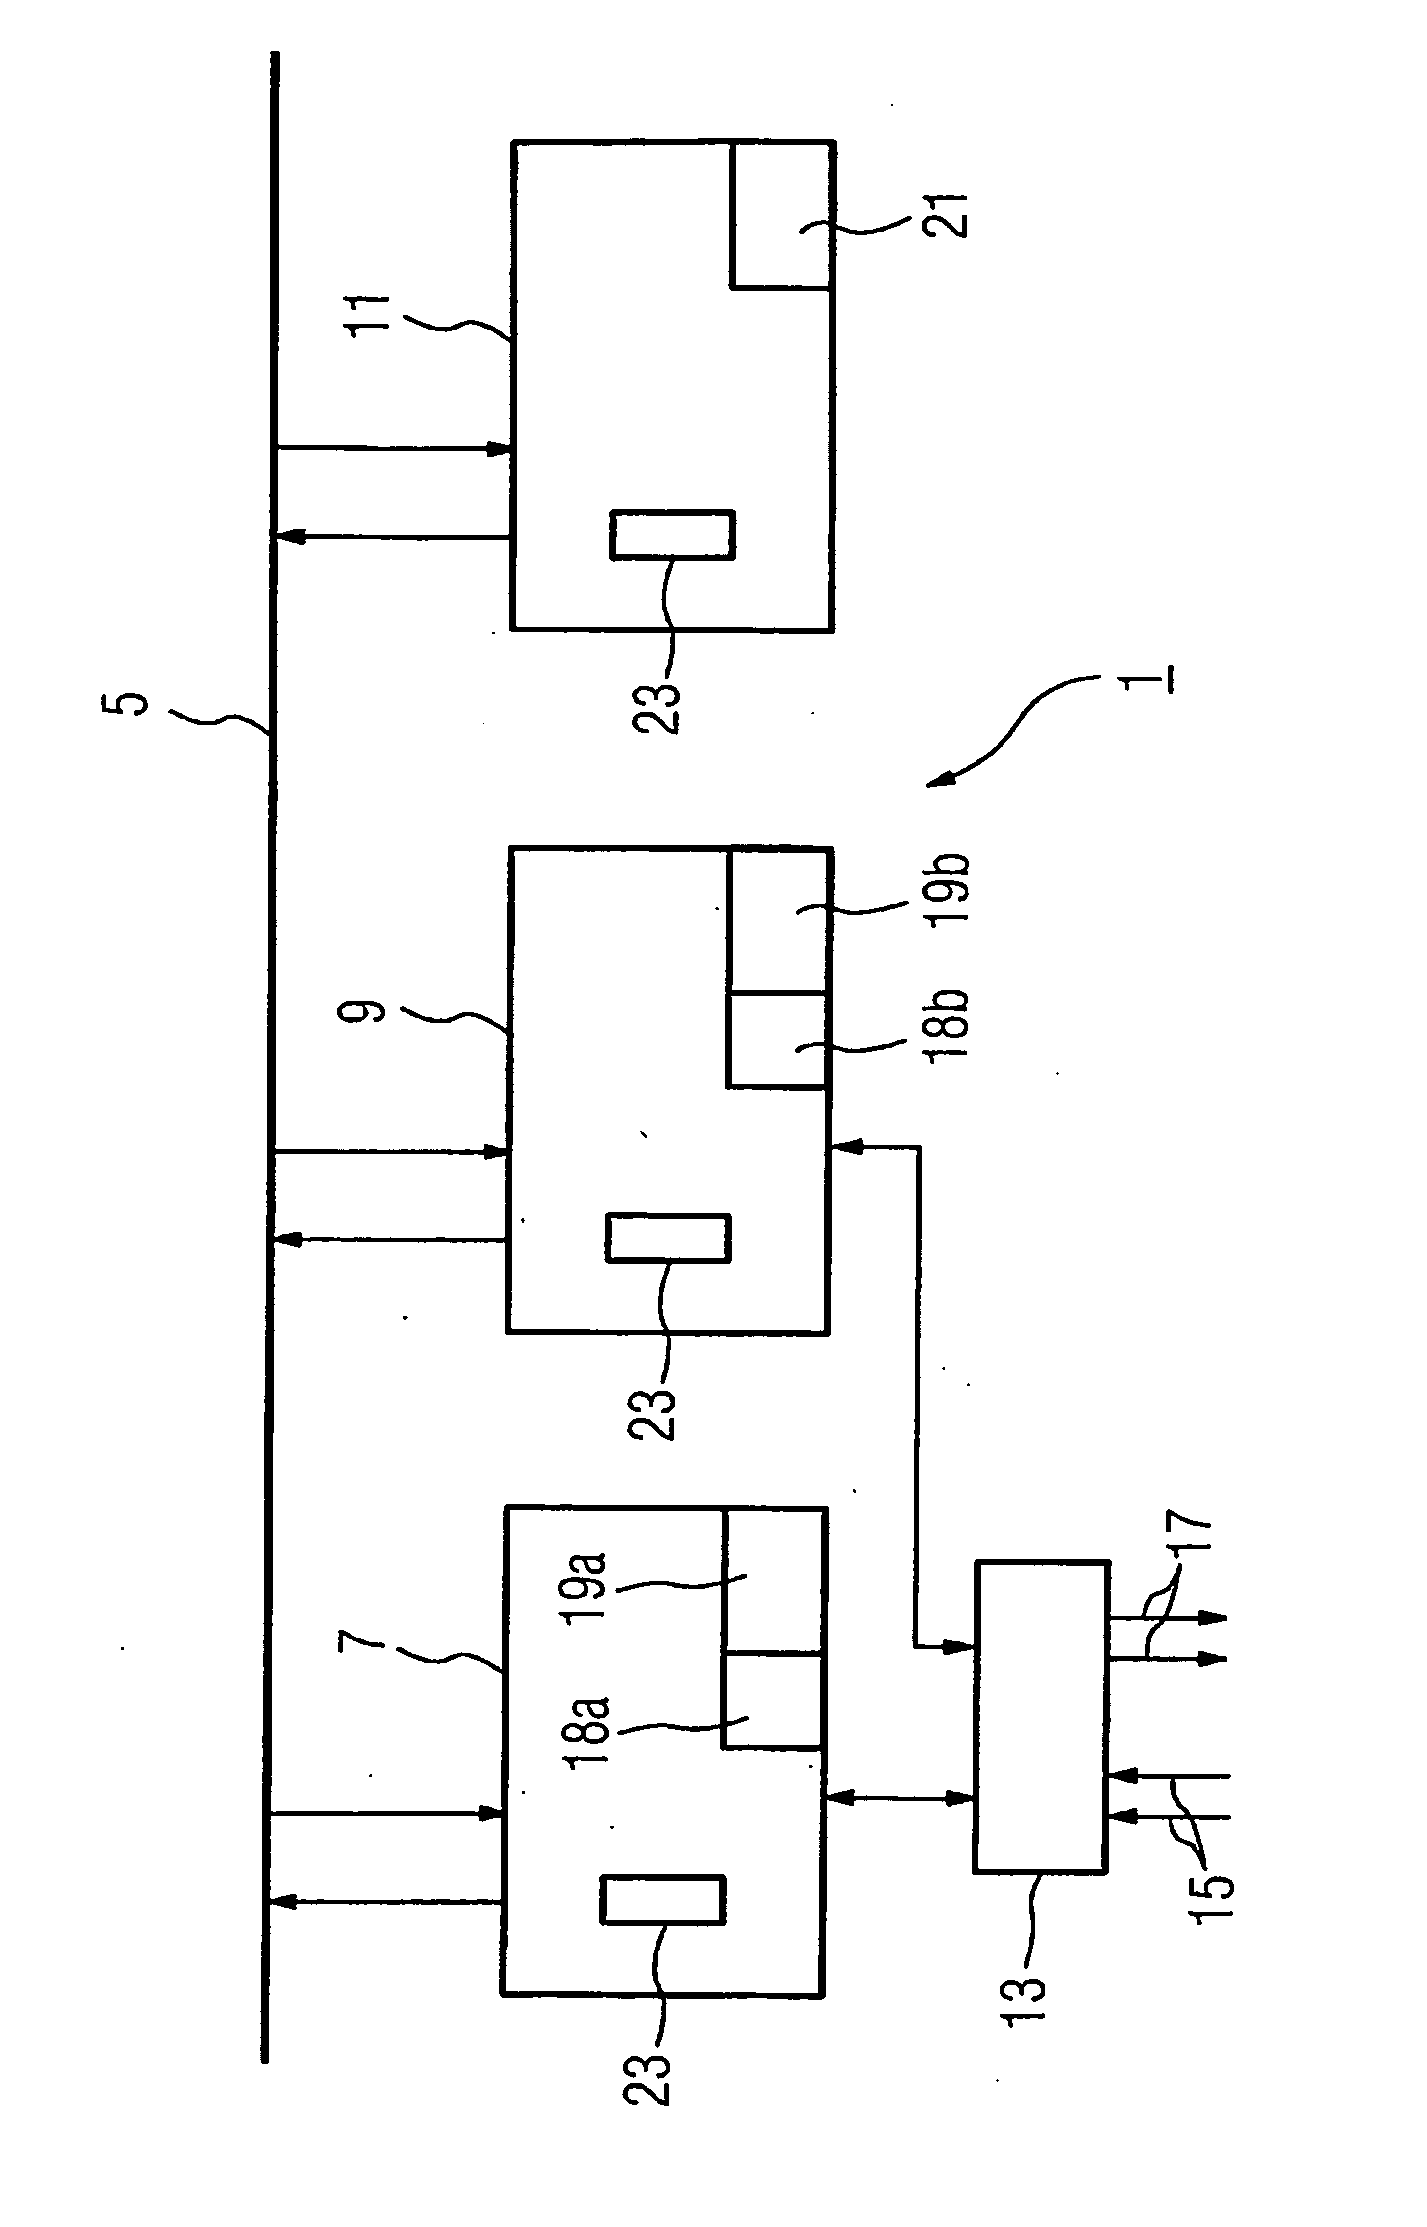 Redundant automation system comprising a master and a standby automation device